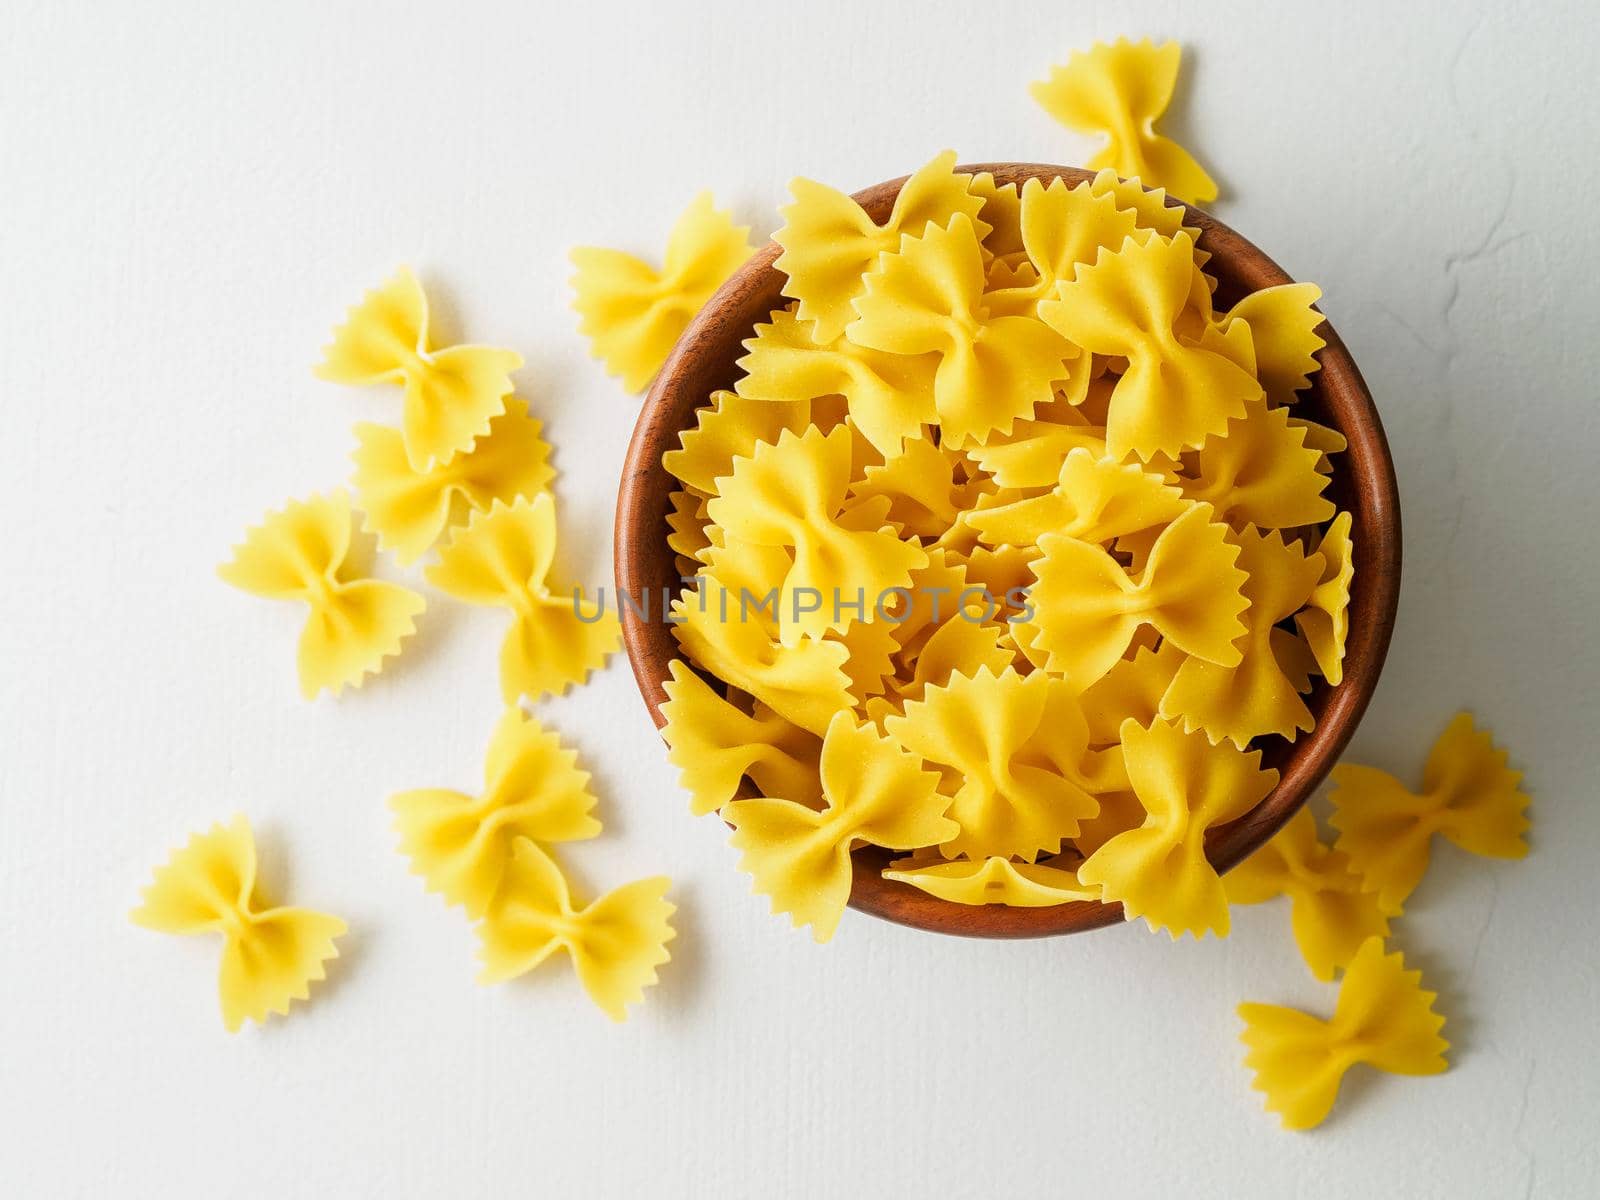 Pasta farfalle in wooden bowl on gray stone table. Top view, close up. by NataBene